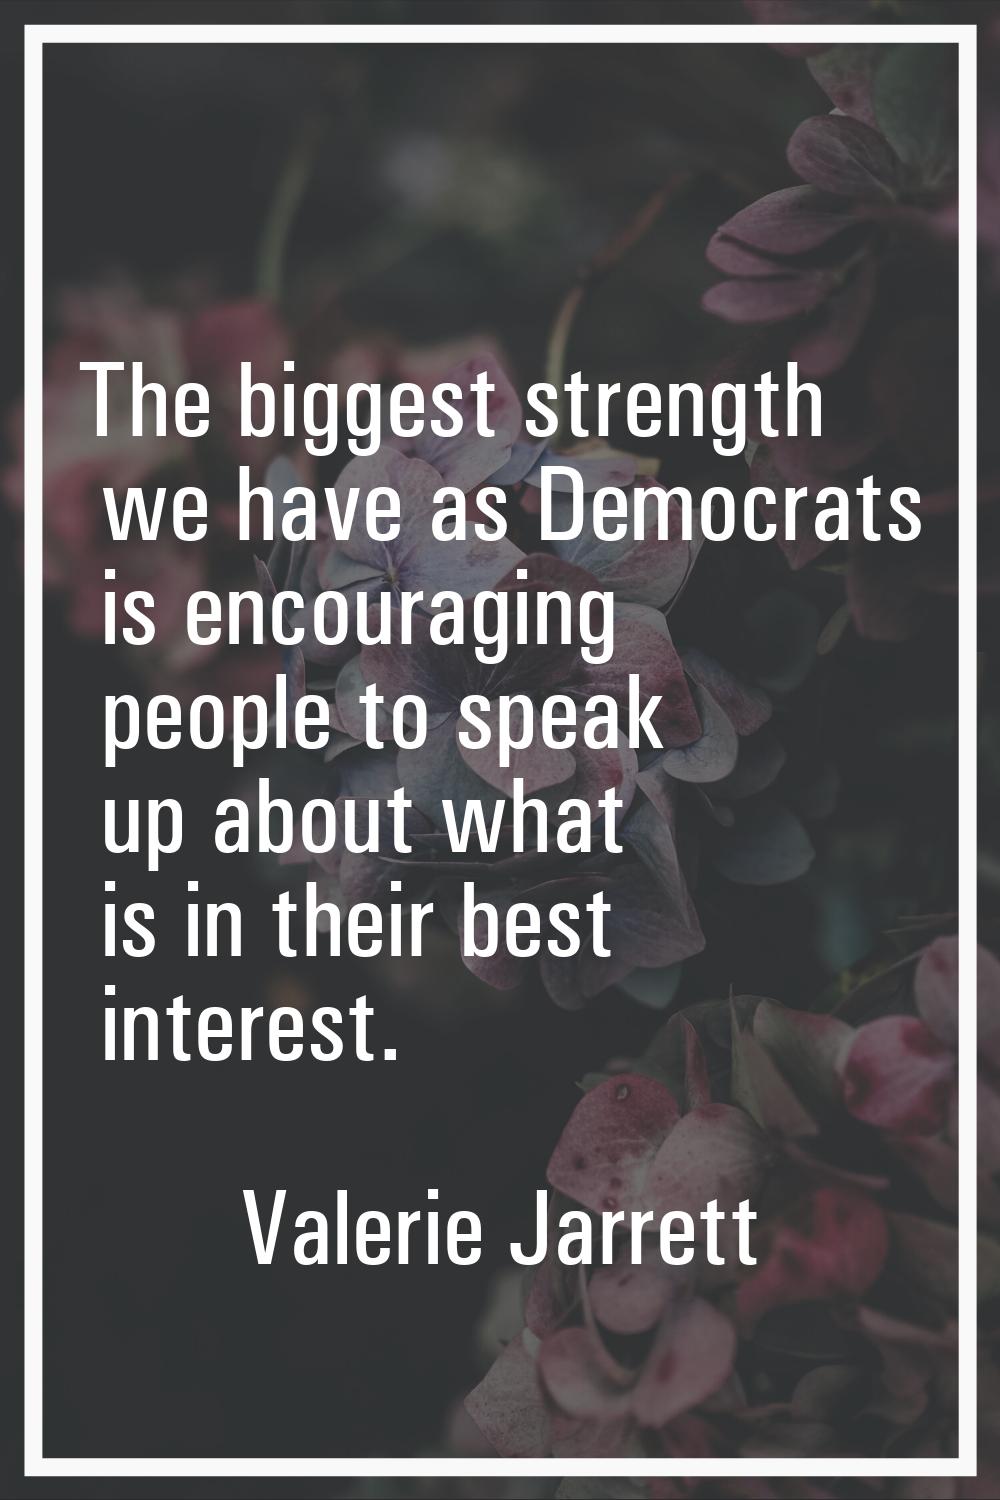 The biggest strength we have as Democrats is encouraging people to speak up about what is in their 